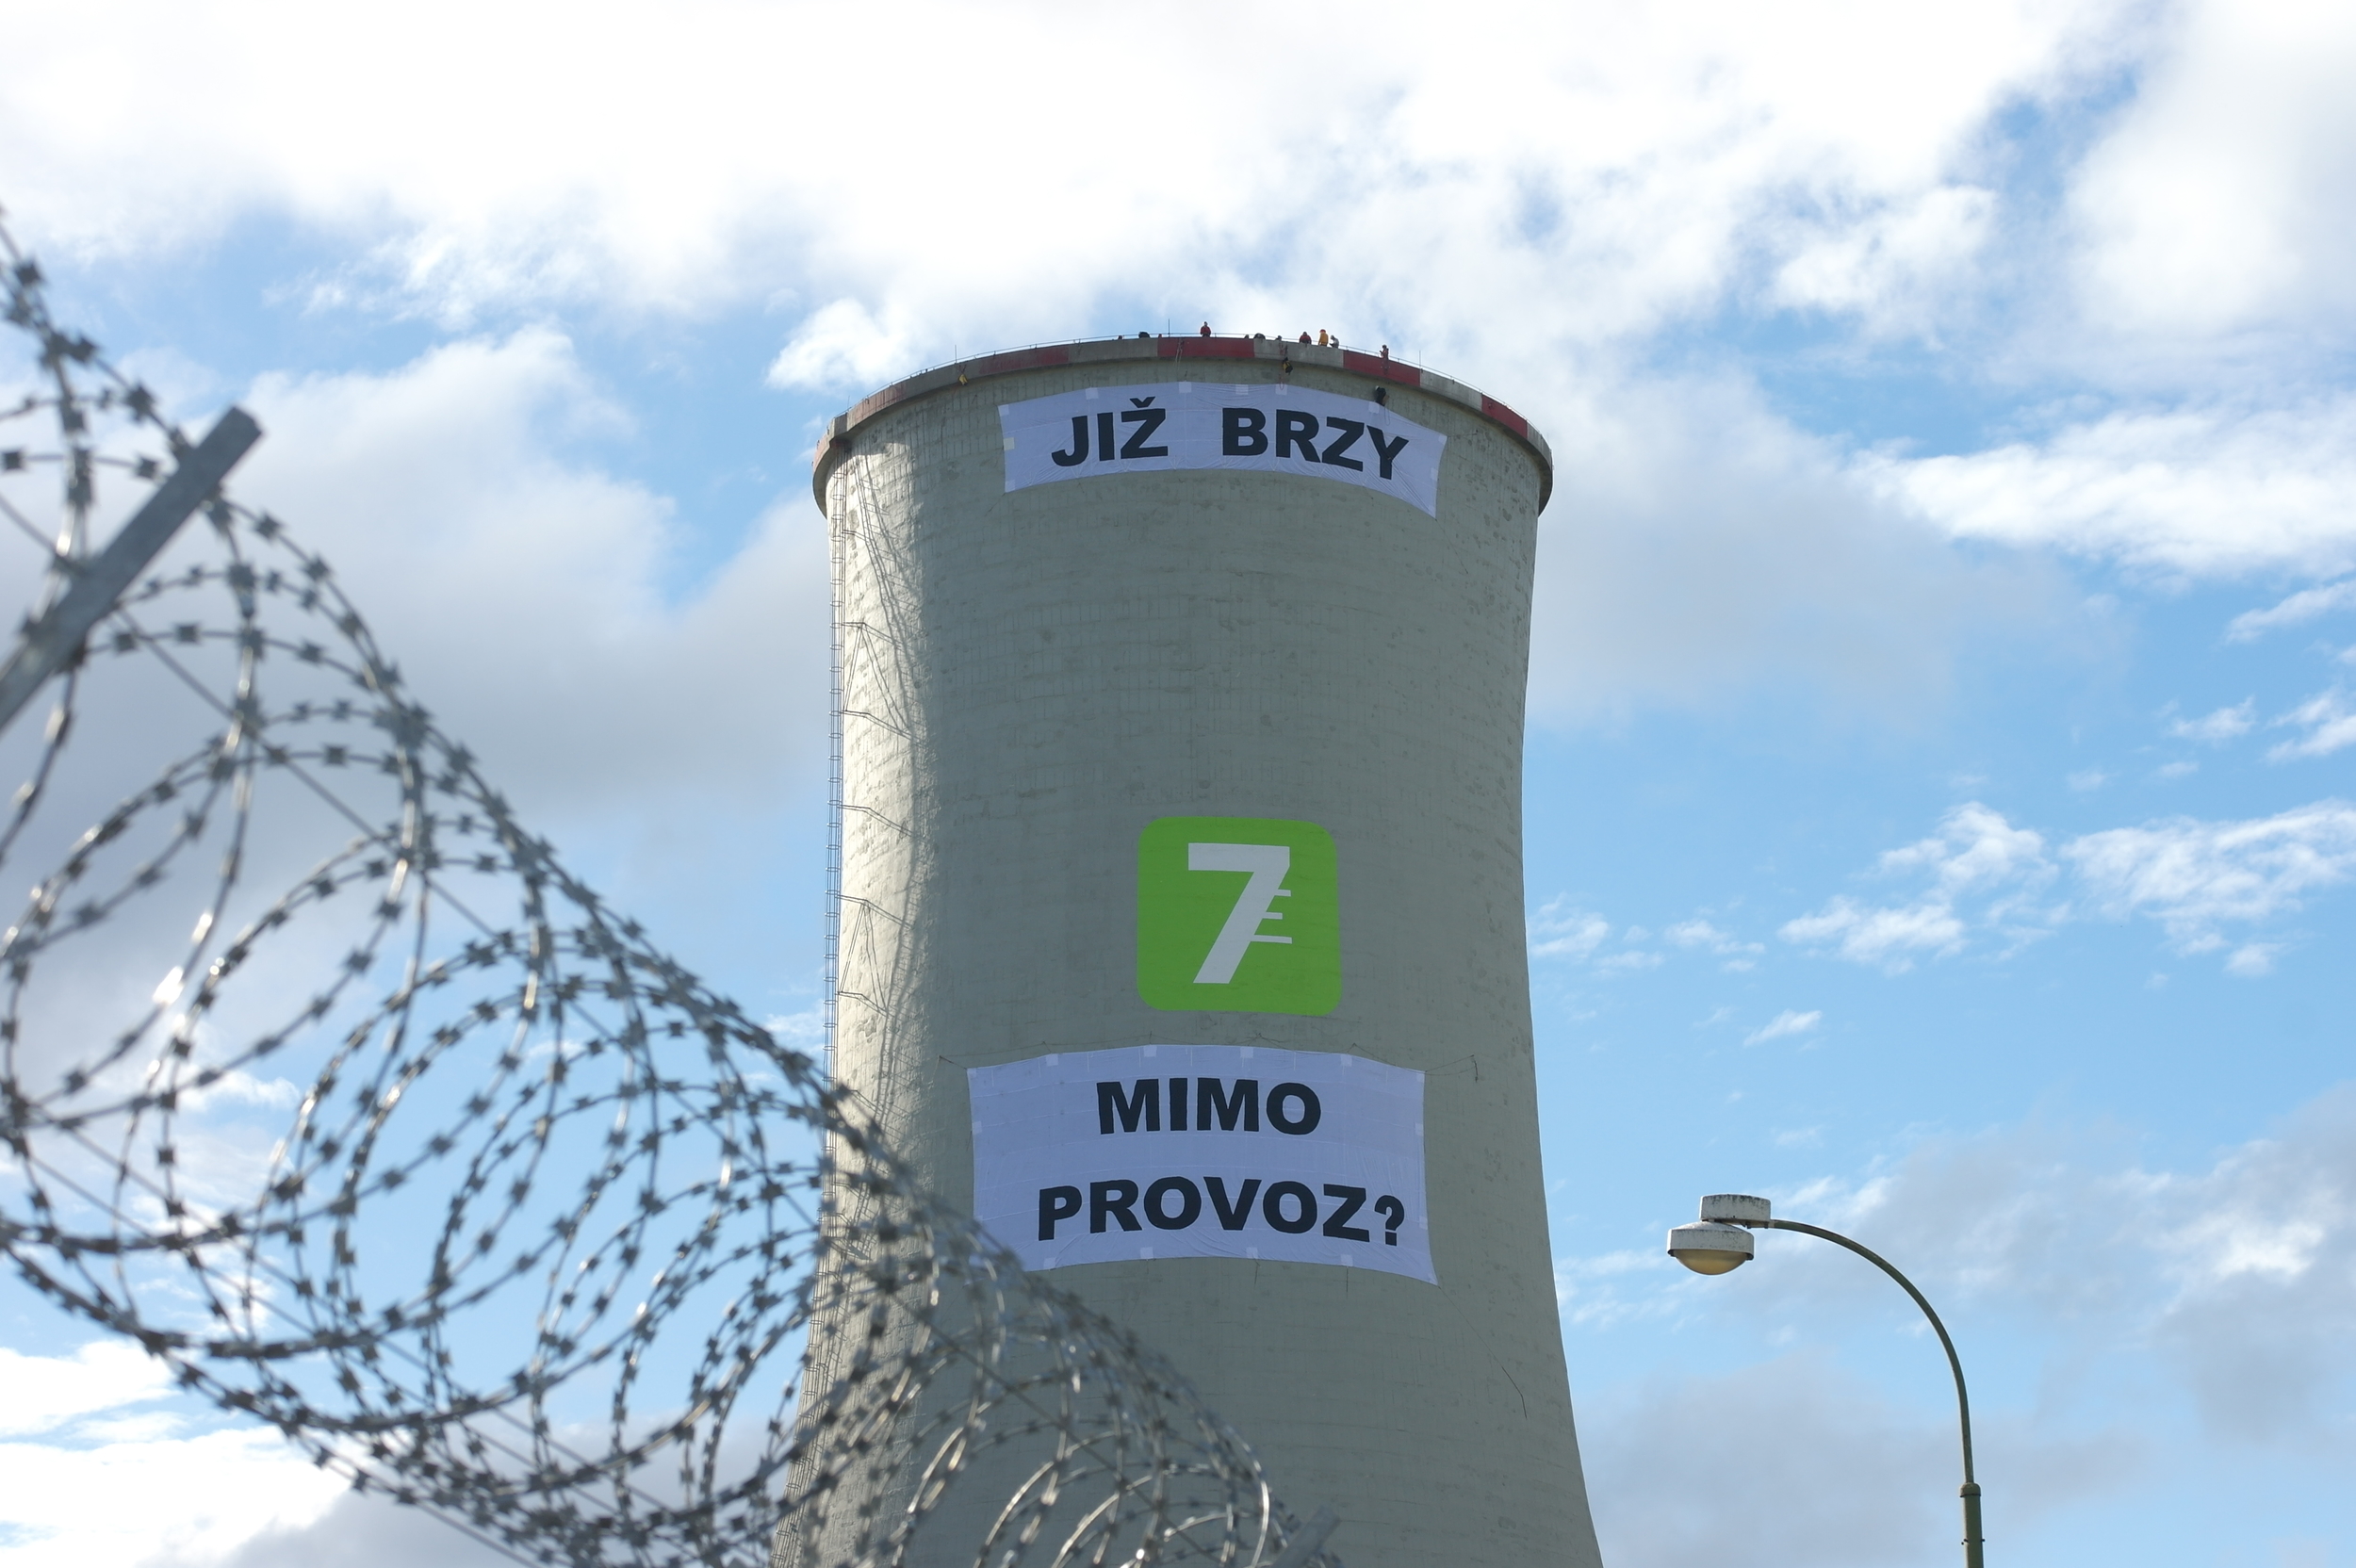 Chvaletice Power Plant Occupation in Czech Republic